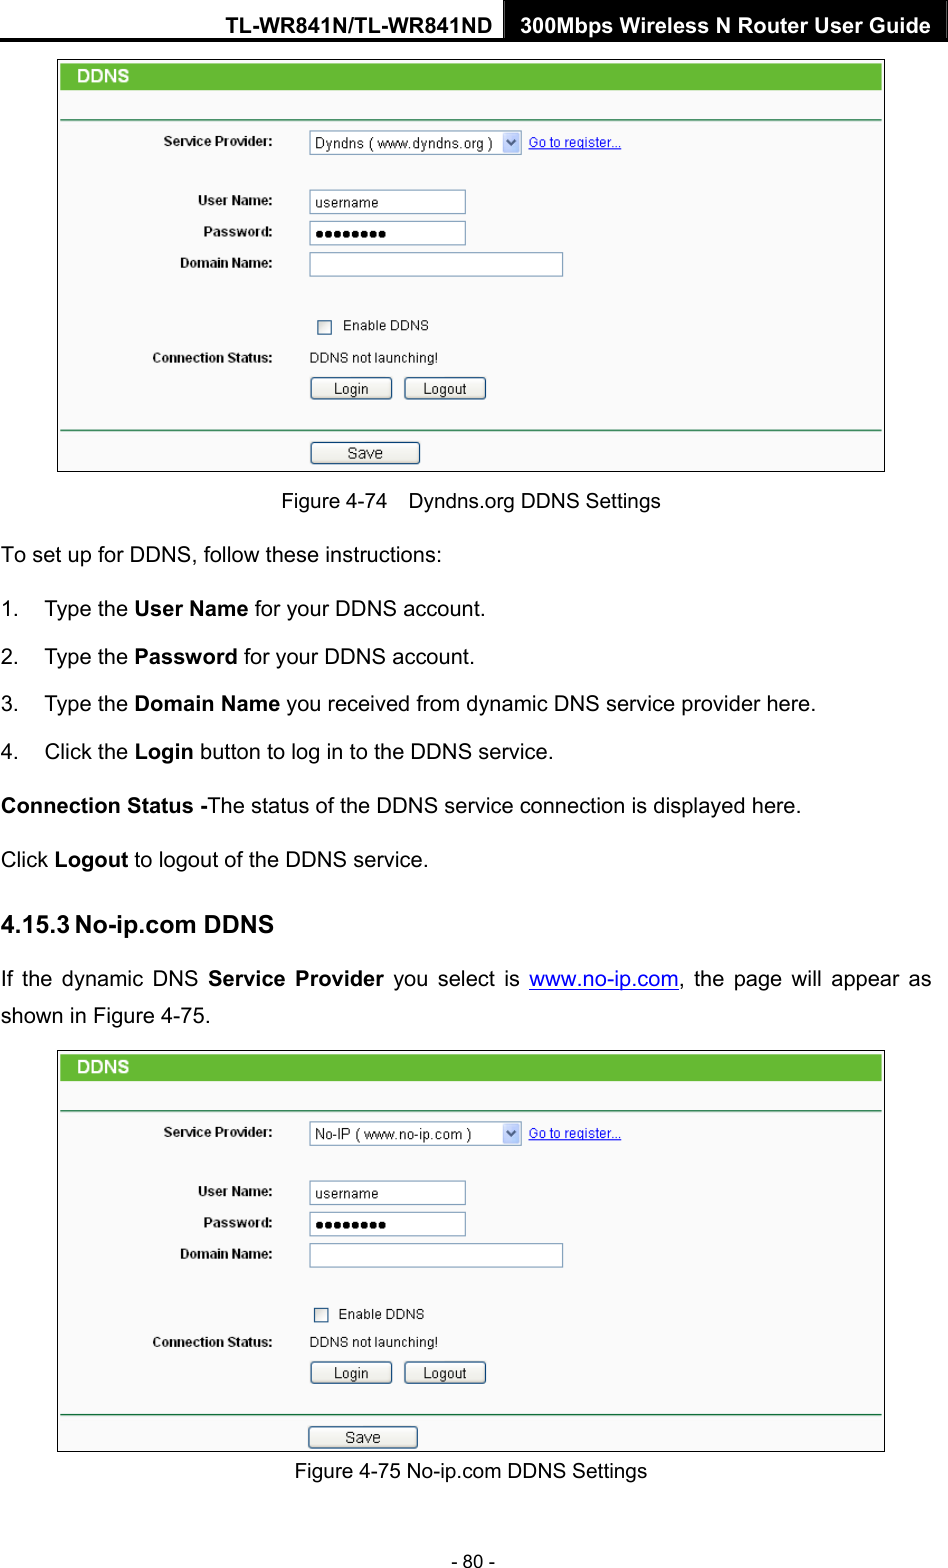 TL-WR841N/TL-WR841ND 300Mbps Wireless N Router User Guide - 80 -  Figure 4-74    Dyndns.org DDNS Settings To set up for DDNS, follow these instructions: 1. Type the User Name for your DDNS account.   2. Type the Password for your DDNS account.   3. Type the Domain Name you received from dynamic DNS service provider here.   4. Click the Login button to log in to the DDNS service. Connection Status -The status of the DDNS service connection is displayed here. Click Logout to logout of the DDNS service.   4.15.3 No-ip.com DDNS If the dynamic DNS Service Provider you select is www.no-ip.com, the page will appear as shown in Figure 4-75.  Figure 4-75 No-ip.com DDNS Settings 